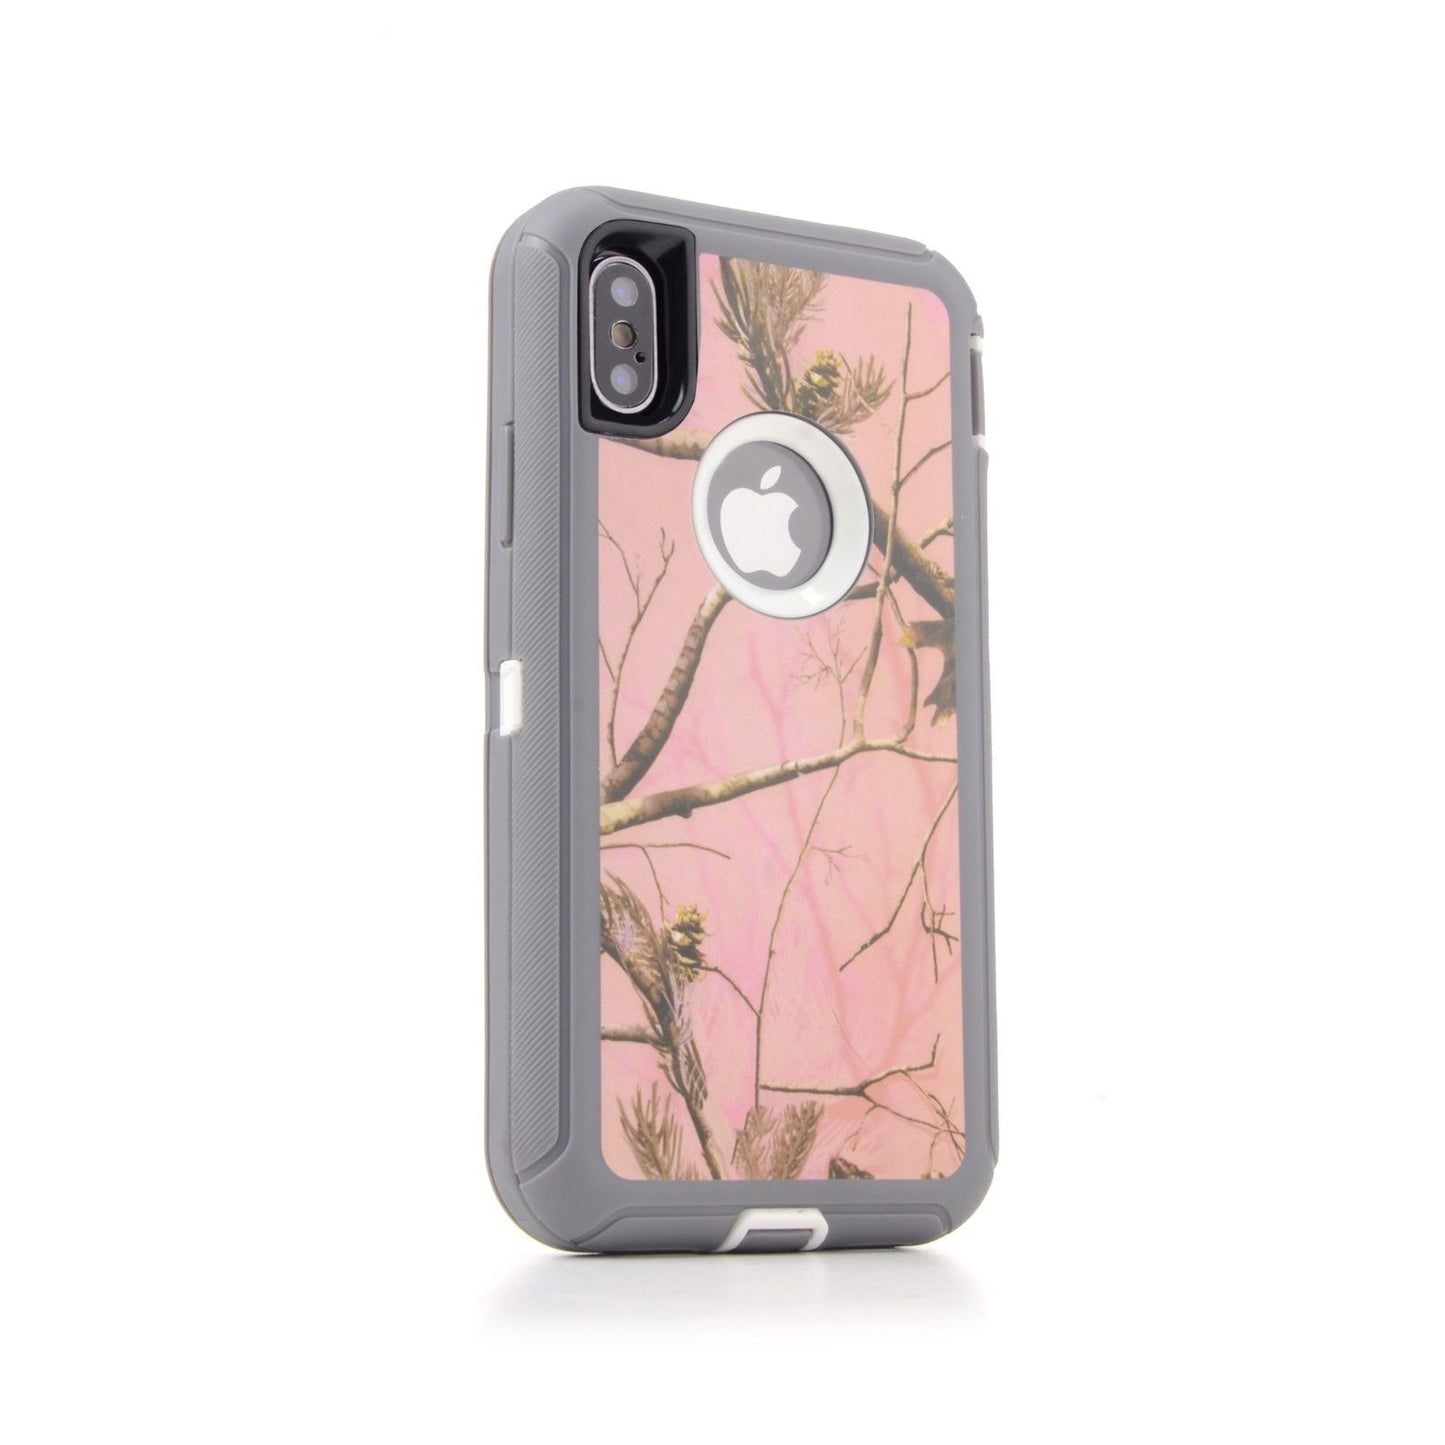 Case Hybrid Heavy Duty Shockproof Rubber For iPhone 7/8/Plus - carolay.co